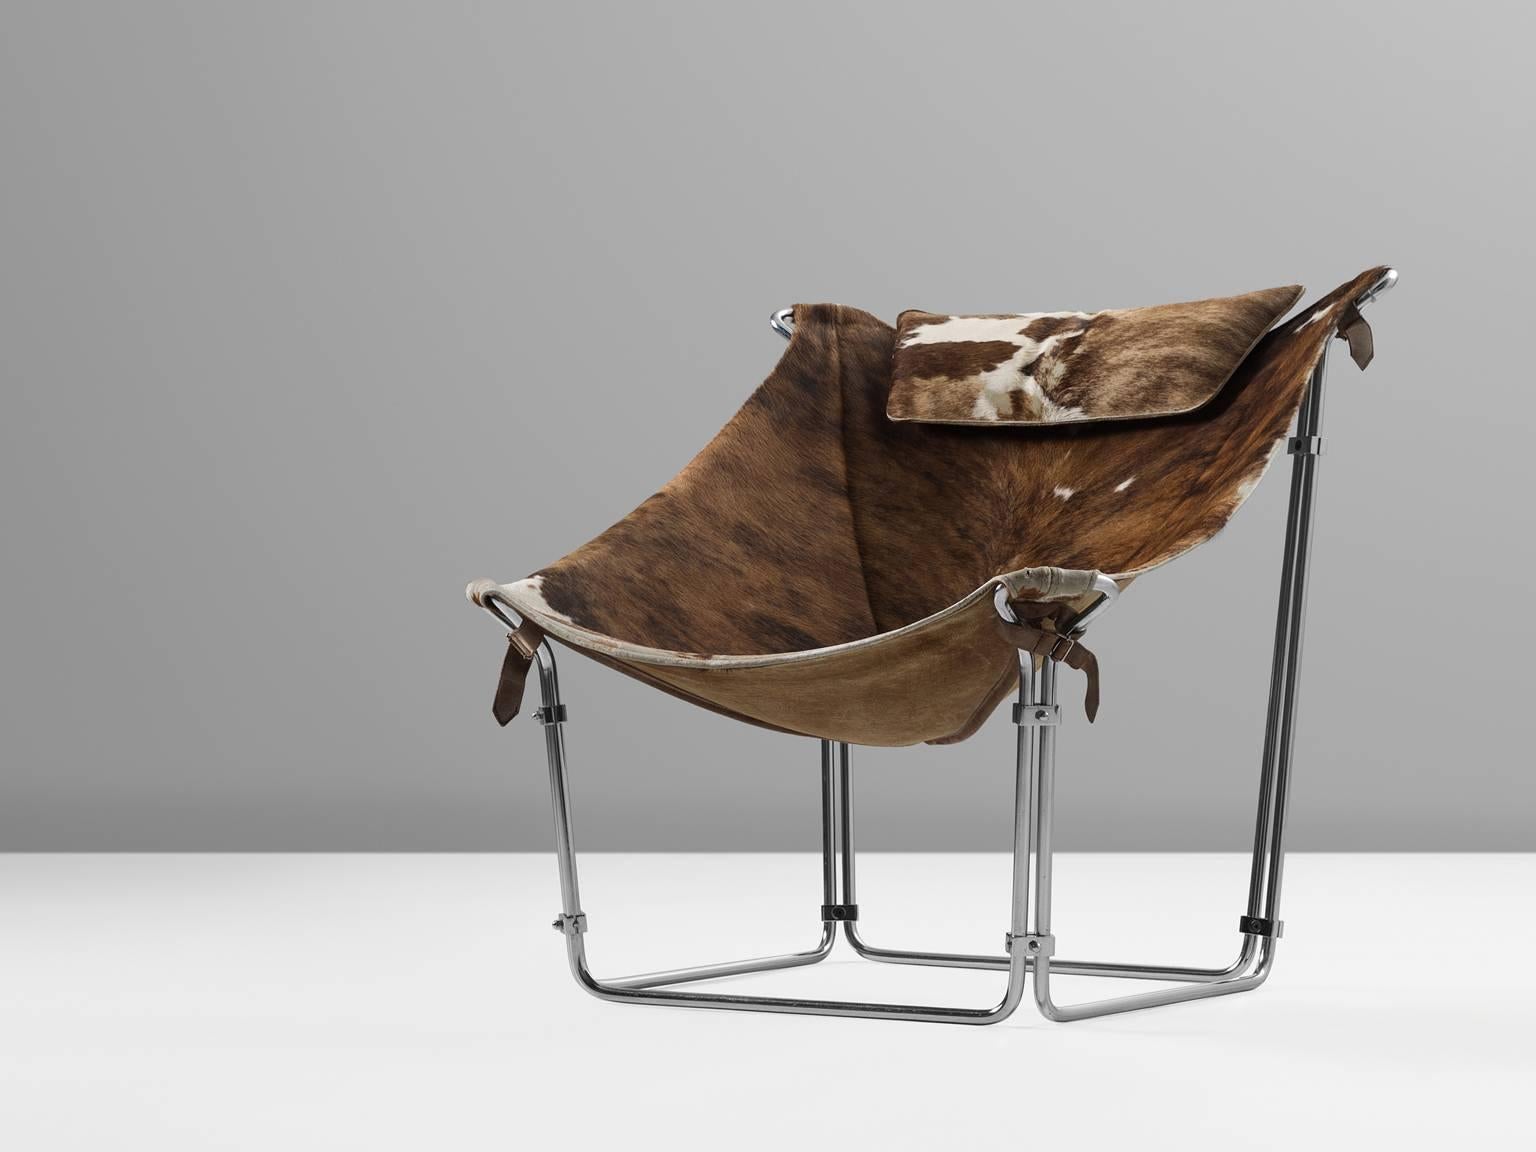 Chair, cow hide, tubular steel, Steiner, Paris, 1969.

This extraordinary lounge chair by Kwok Hoi Chan is produced by Steiner, Paris. What marks this design is the frame made of tubular steel, covered with a beautiful hide.

Kwok Hoi Chan